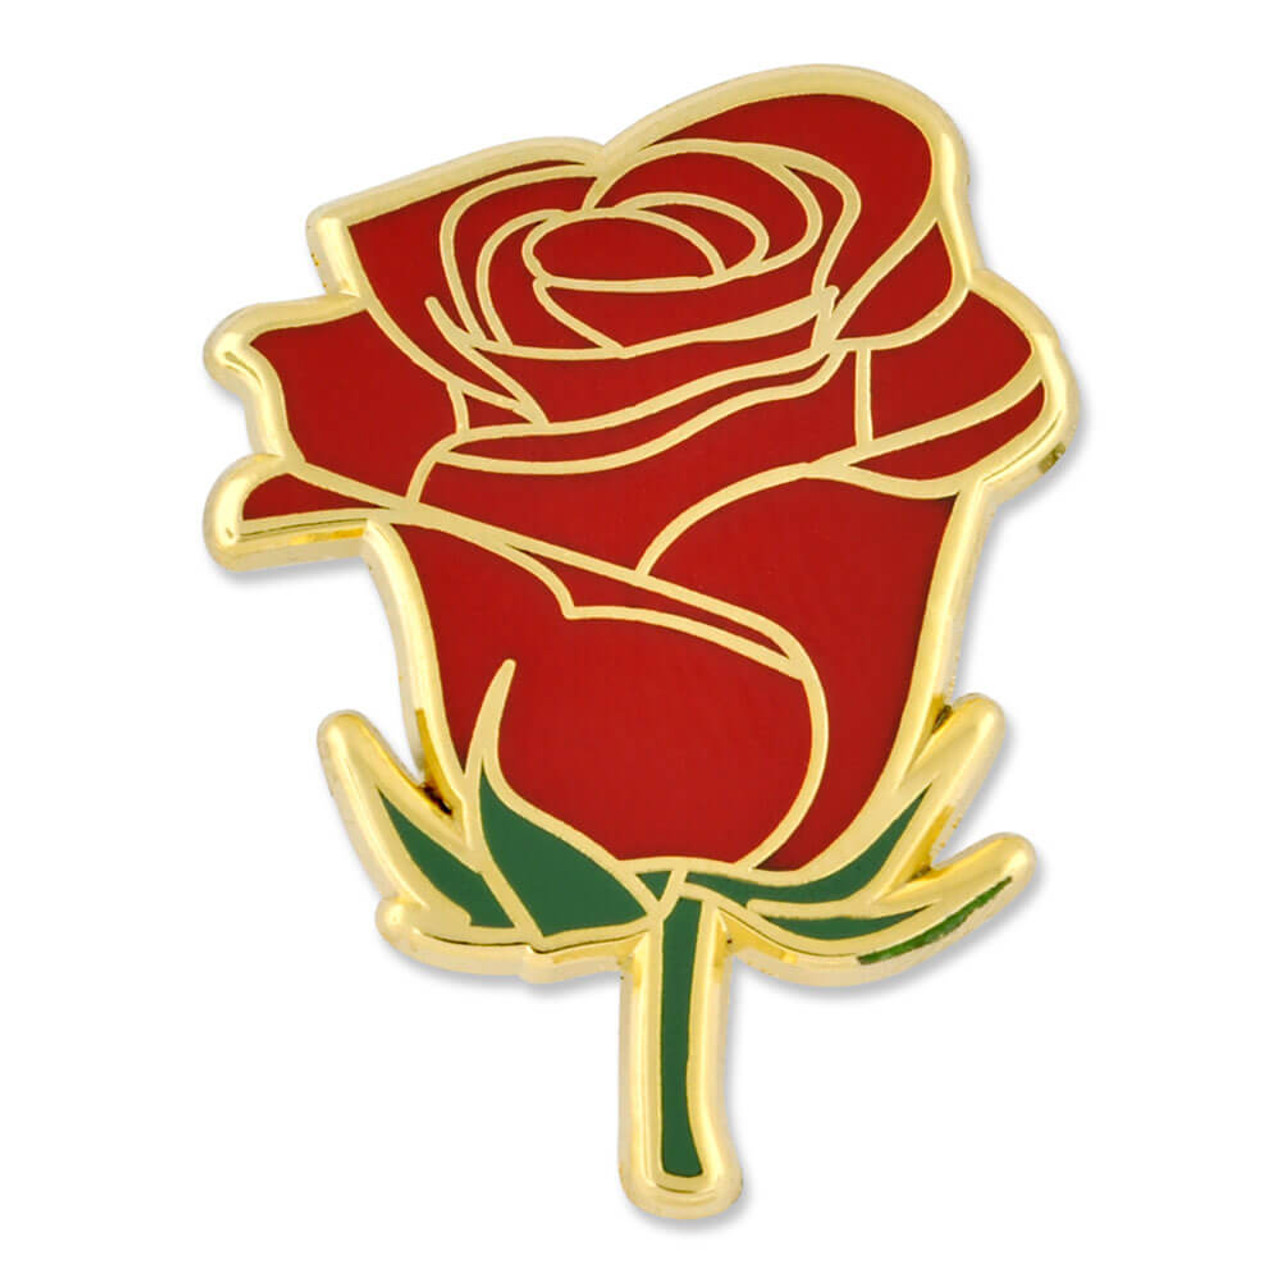 Red Rose Lapel Pin | Red/White | Flower Pins by PinMart